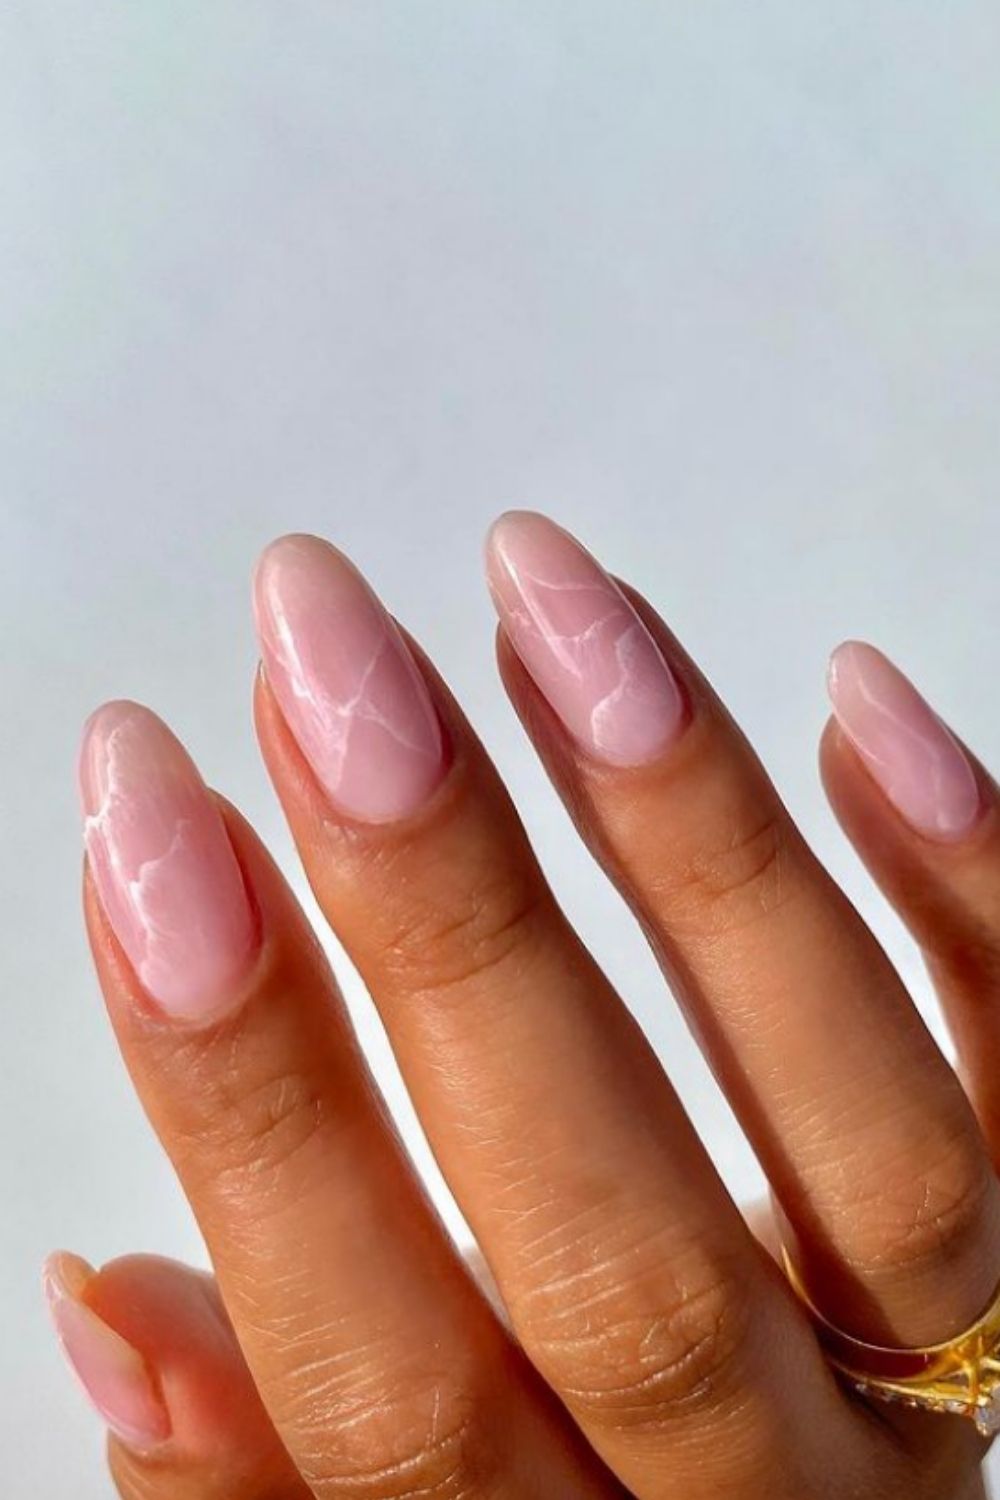 Summer almond nails | To Be All About the Almond Nails This Summer